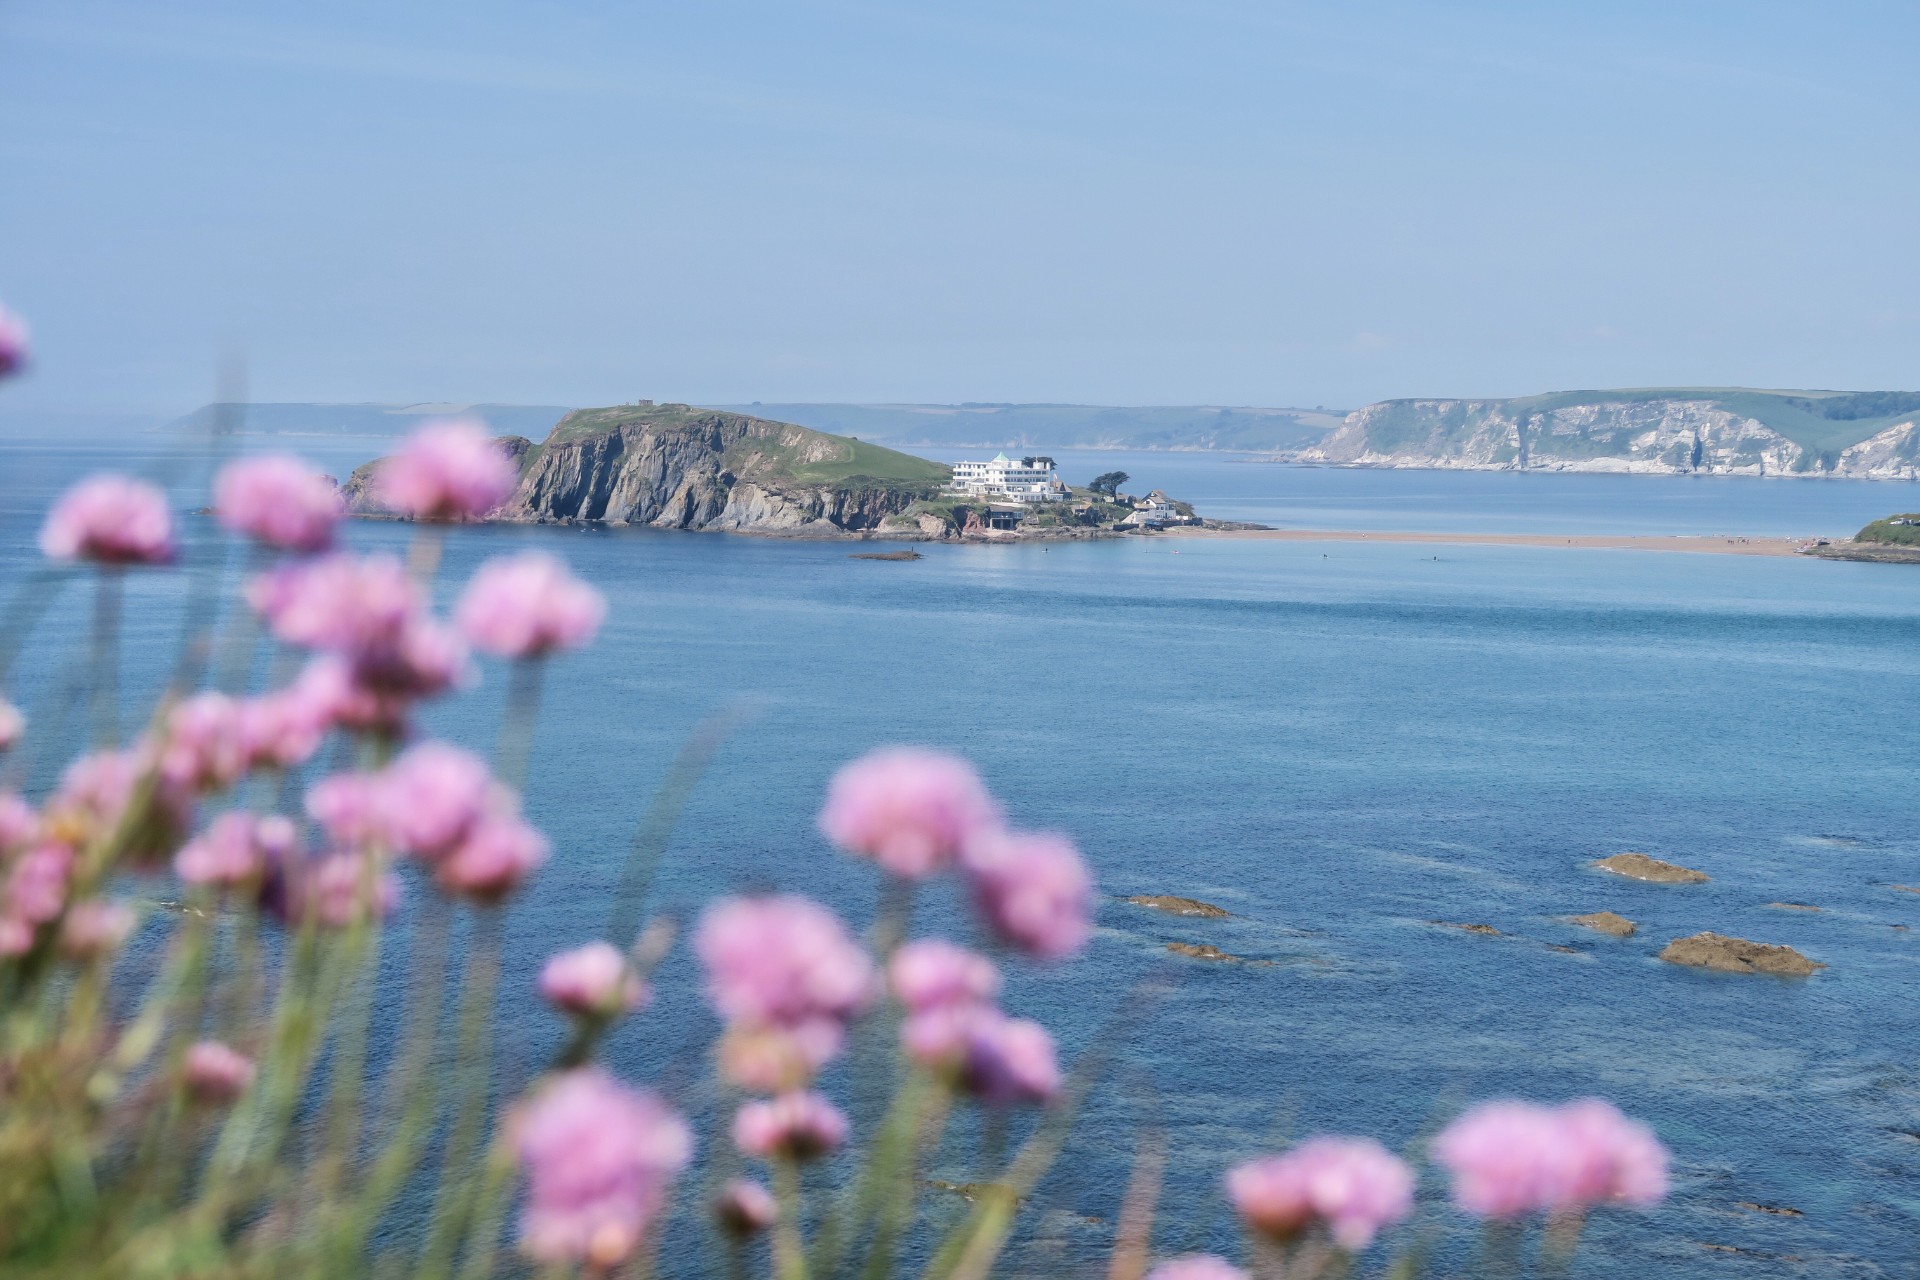 Burgh Island Devon. Island in the middle of a blue sea with a hotel on it. Pink flowers in foreground. 17 Beautiful Places to Visit in Devon for a Great Day Out. Devon England. Devon UK. Things to do in Devon. Places to see in Devon. What to see in Devon. Things to see in Devon. What to do in Devon. Devon attractions. Devon top attractions. Devon travel blog. Devon travel guide. The English Riviera. Exeter. Plymouth. Dartmouth. Dartmoor National Park. Exmoor National Park. Salcombe. Clovelly. Totnes. Appledore. Watermouth. Croyde. Woolacombe. Dartmouth. Ilfracombe. Beer. Burgh Island. Lundy Island. Click through to read more...